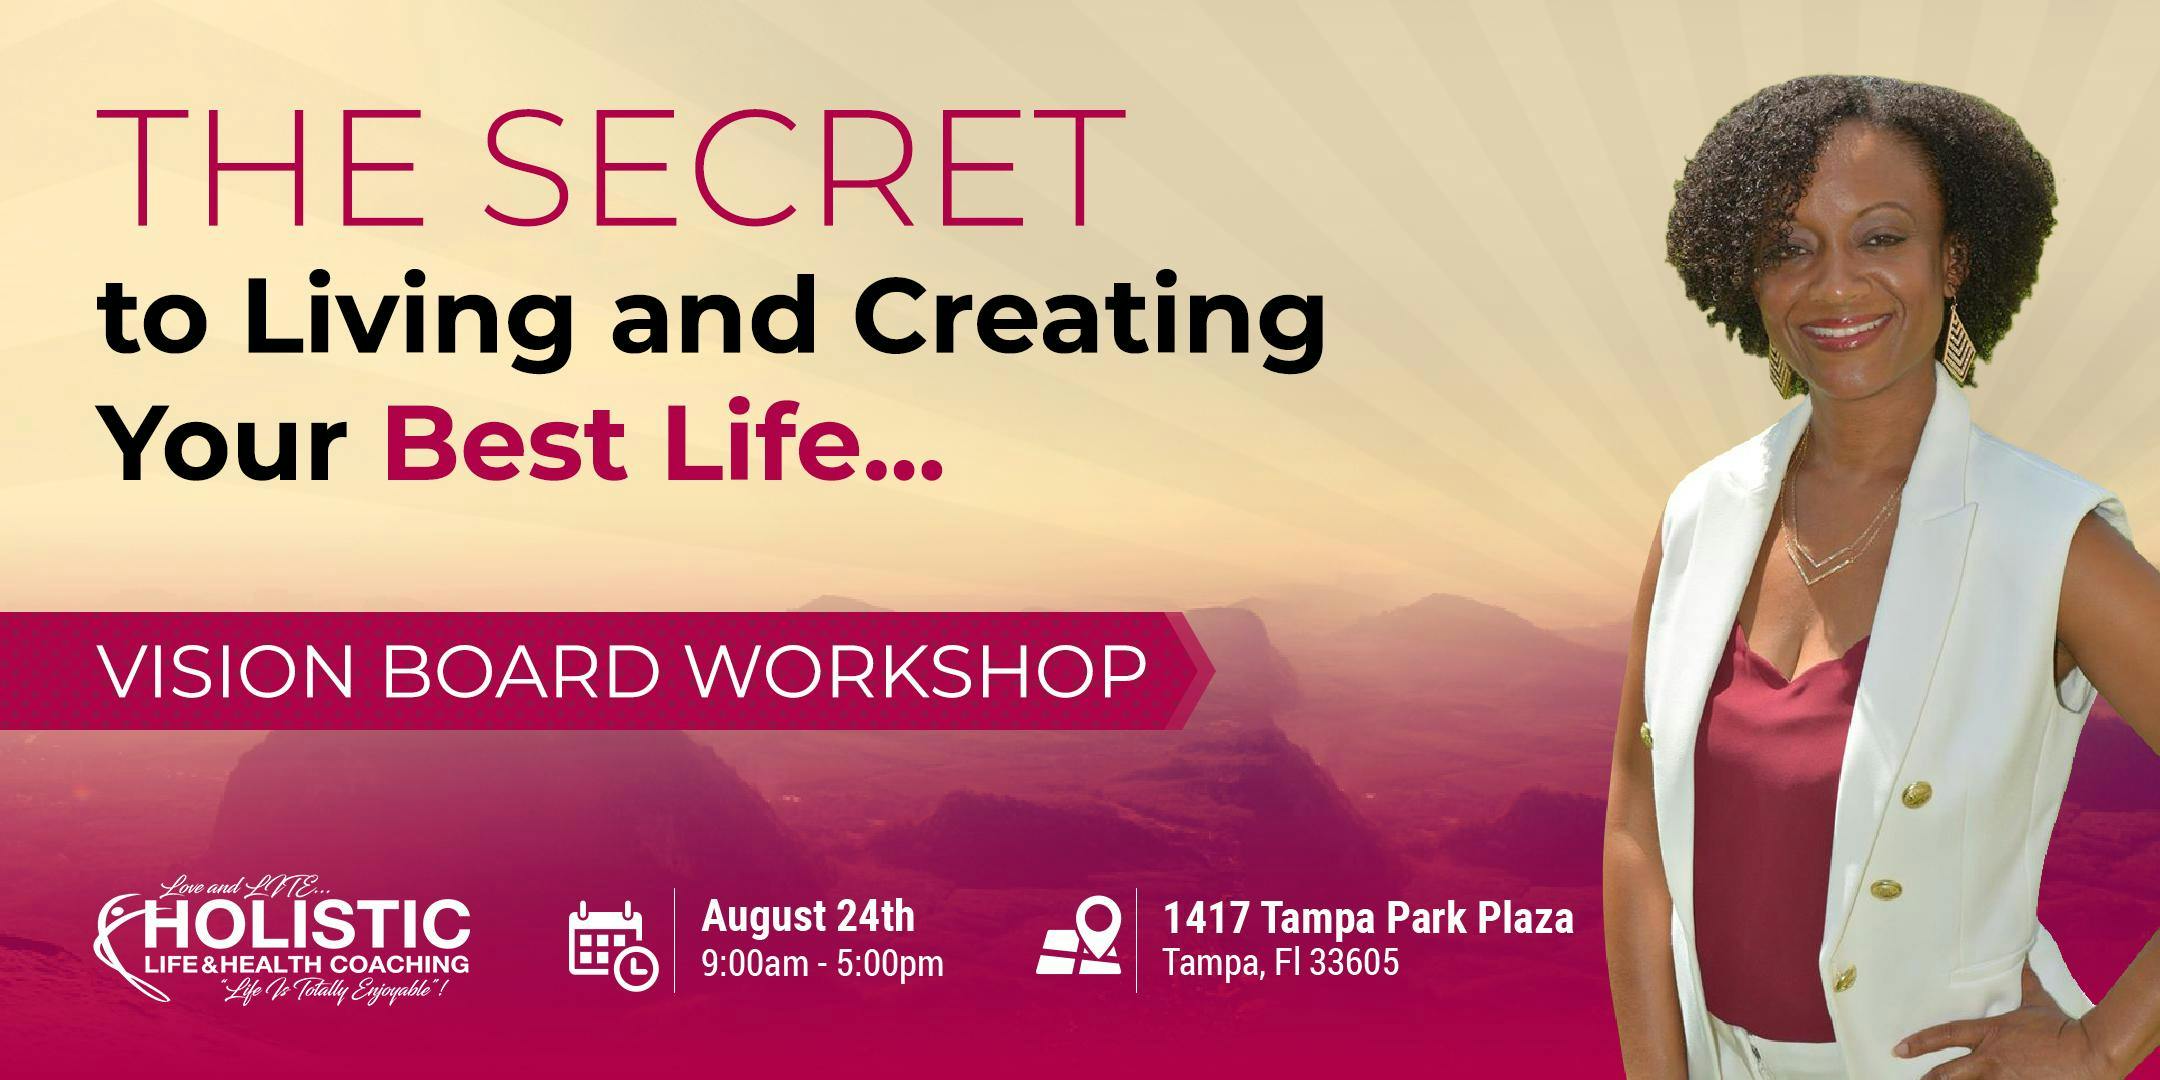 The Secret to Living and Creating Your Best Life - Vision Board Workshop